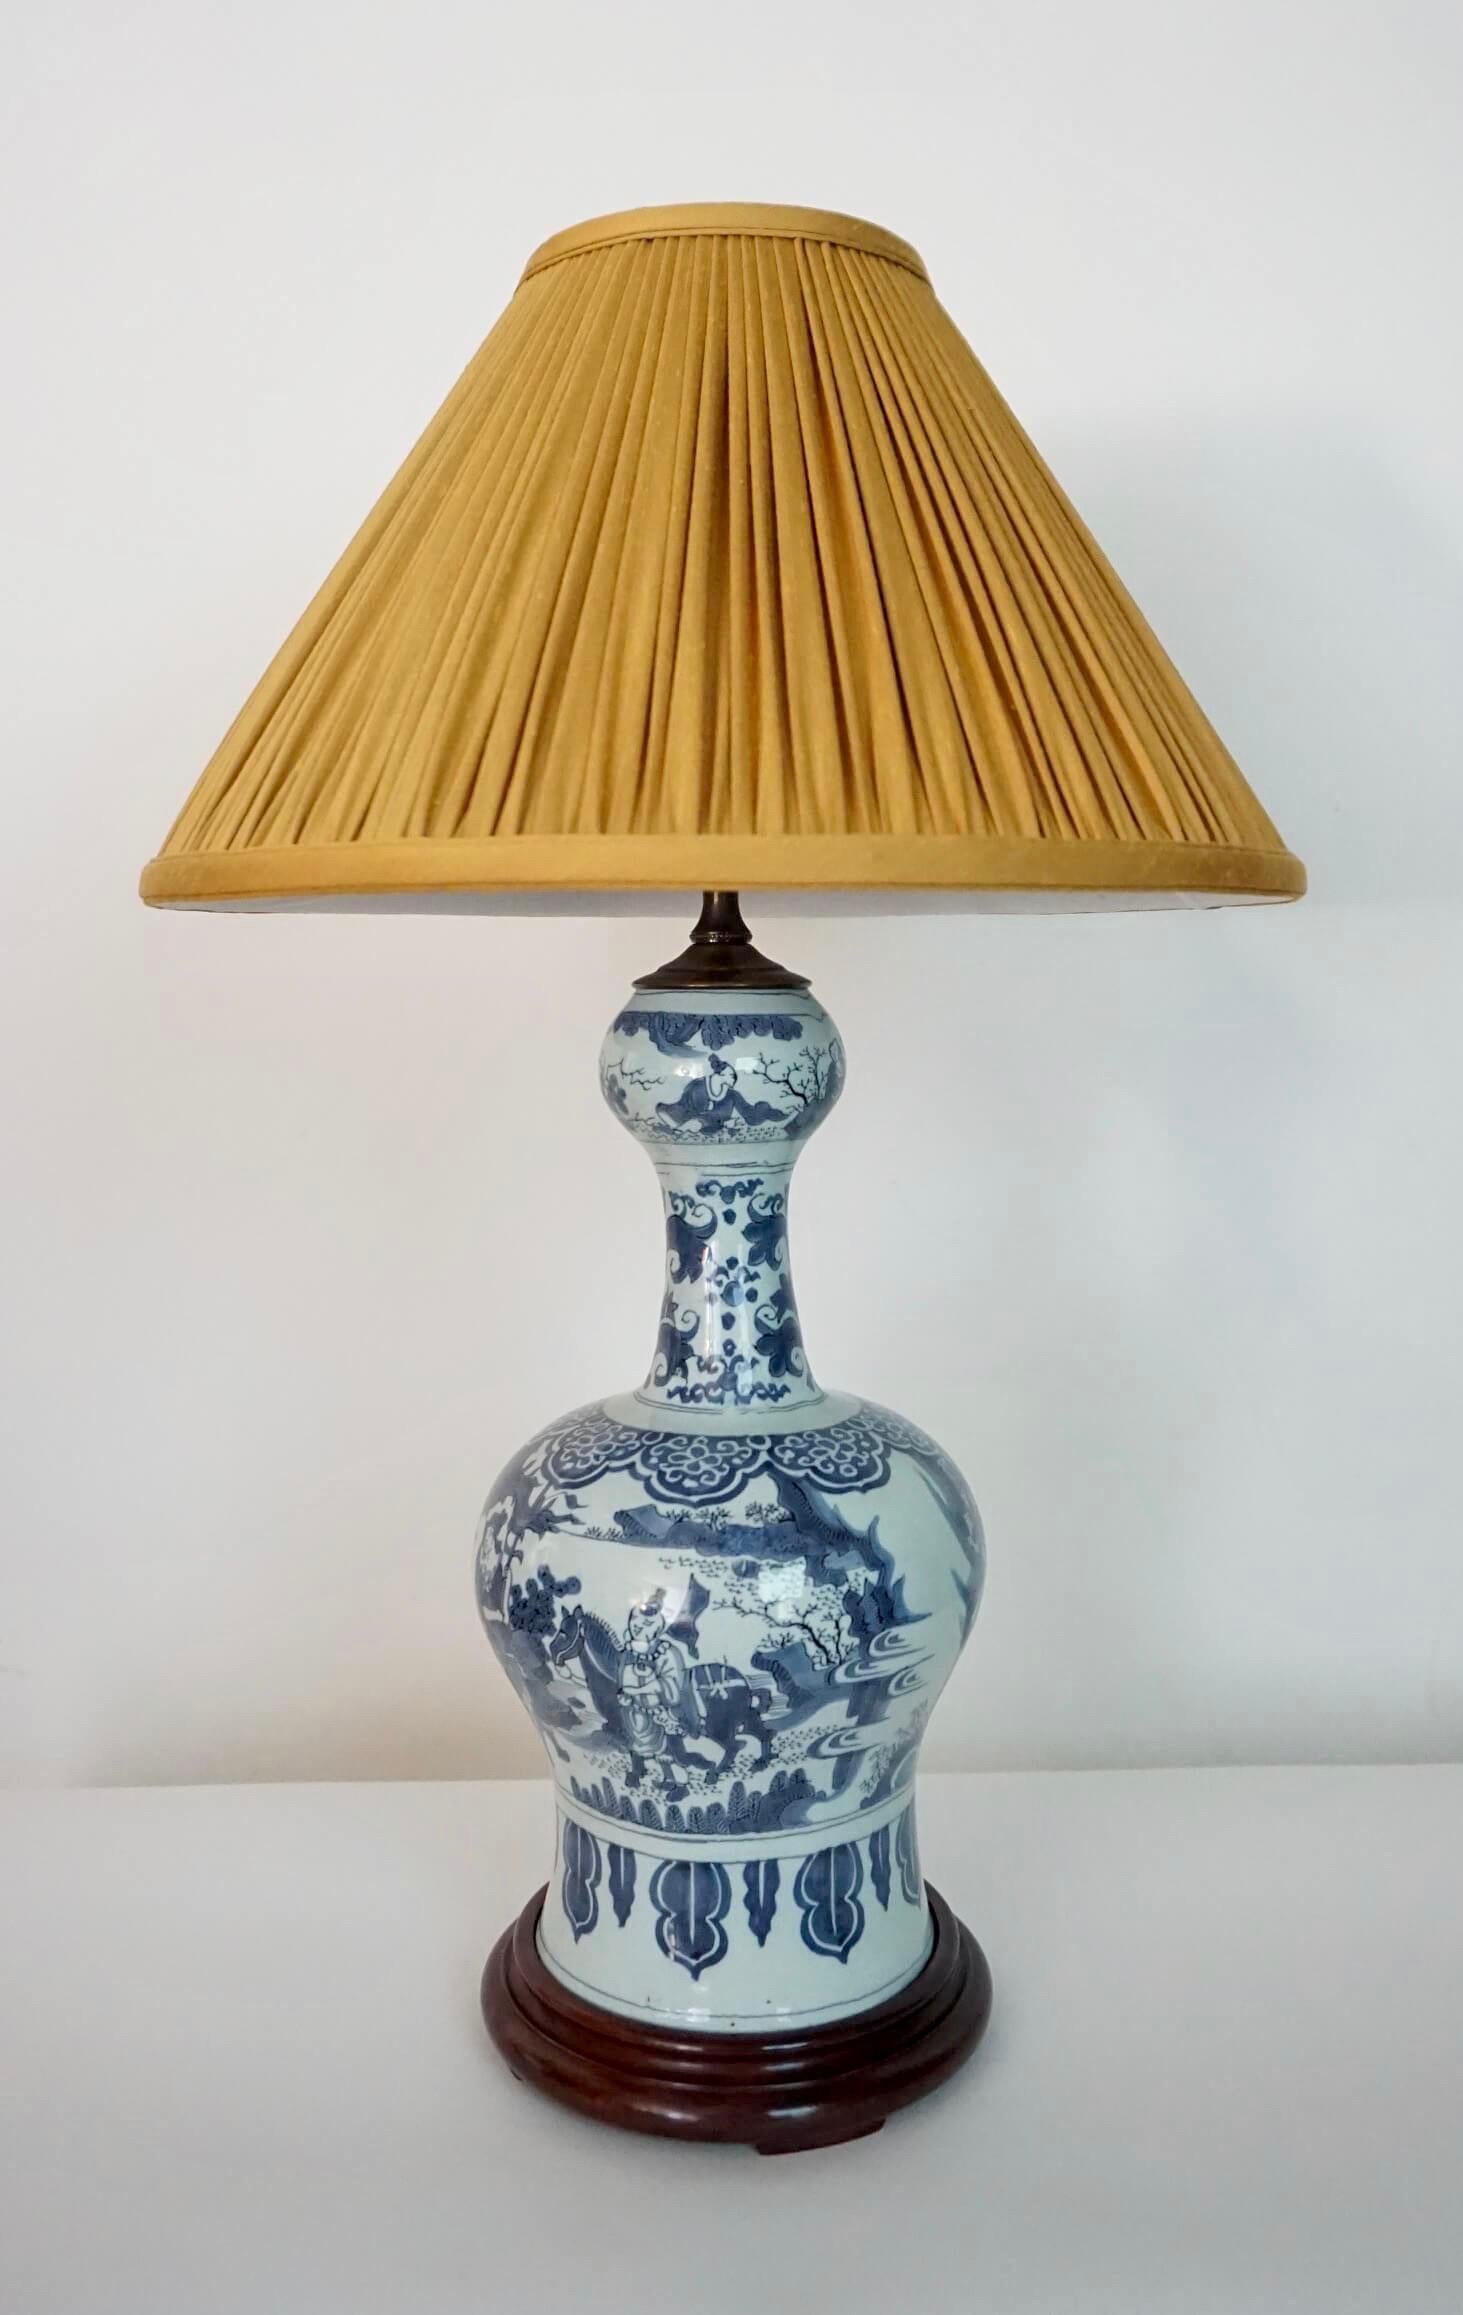 Beautiful circa 1700 Dutch delft vase of round 'garlic-neck' form having blue figural landscape decoration under tin-glaze in 'transitional' Ming style; converted for use as a table lamp with patinated brass fittings and wood base. Vase alone